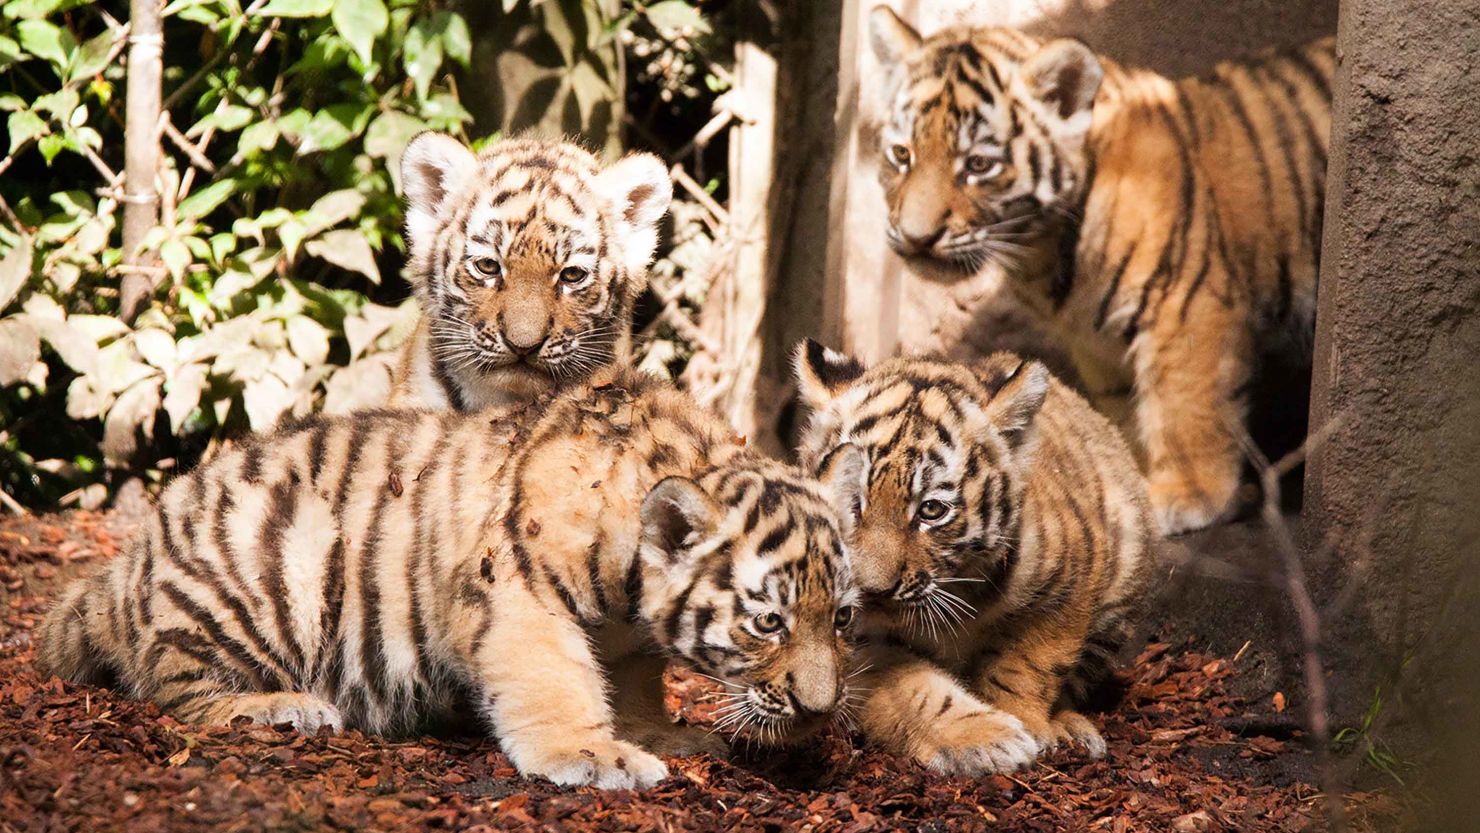 The quadruplets, born in June, made their first outdoor appearance on Thursday.